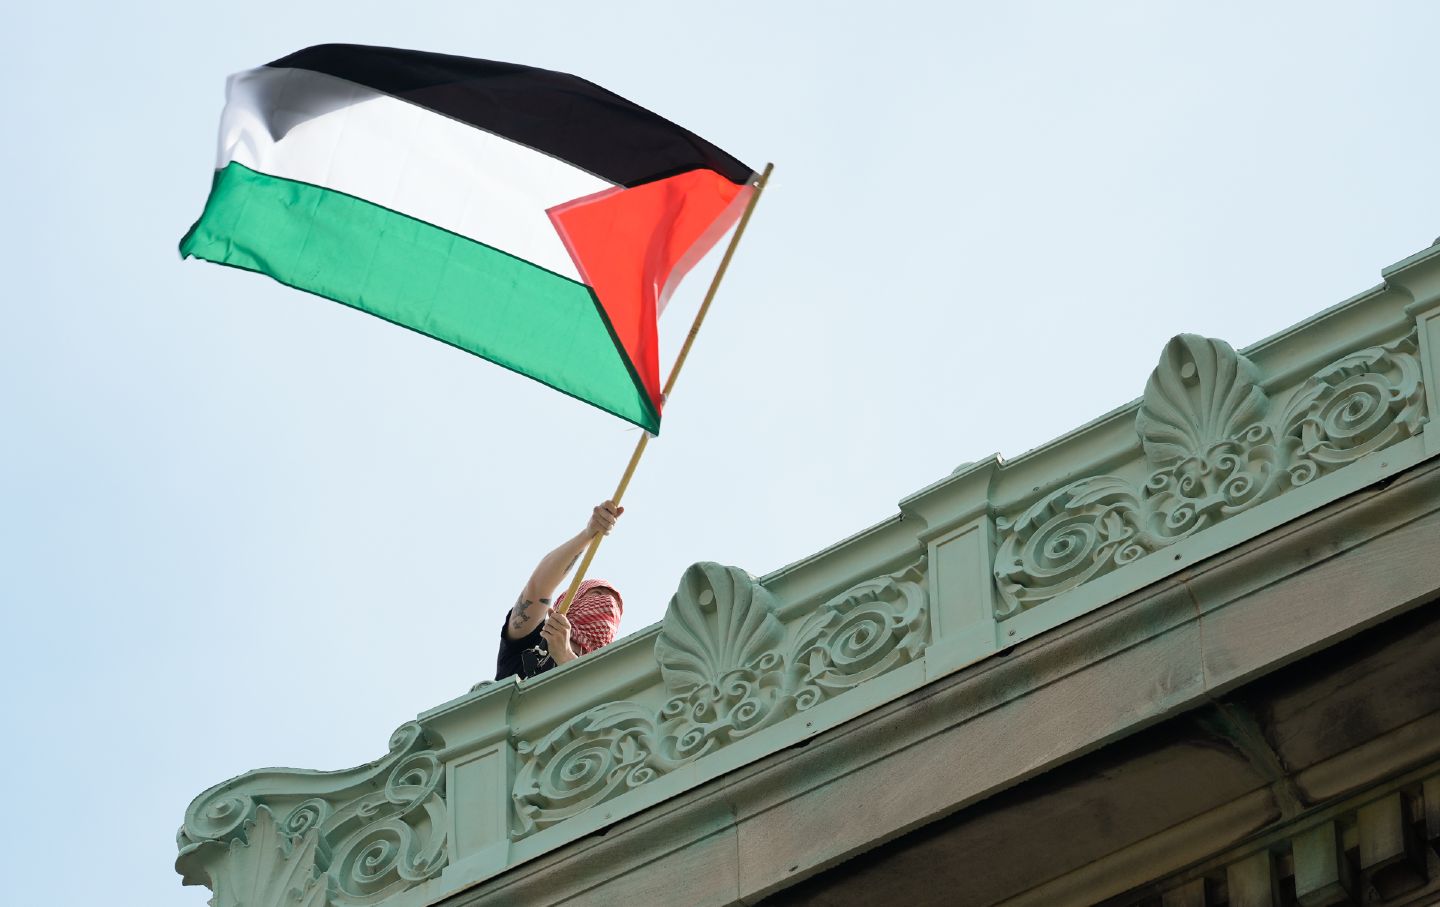 Protester in keffiyeh waves flag from roof